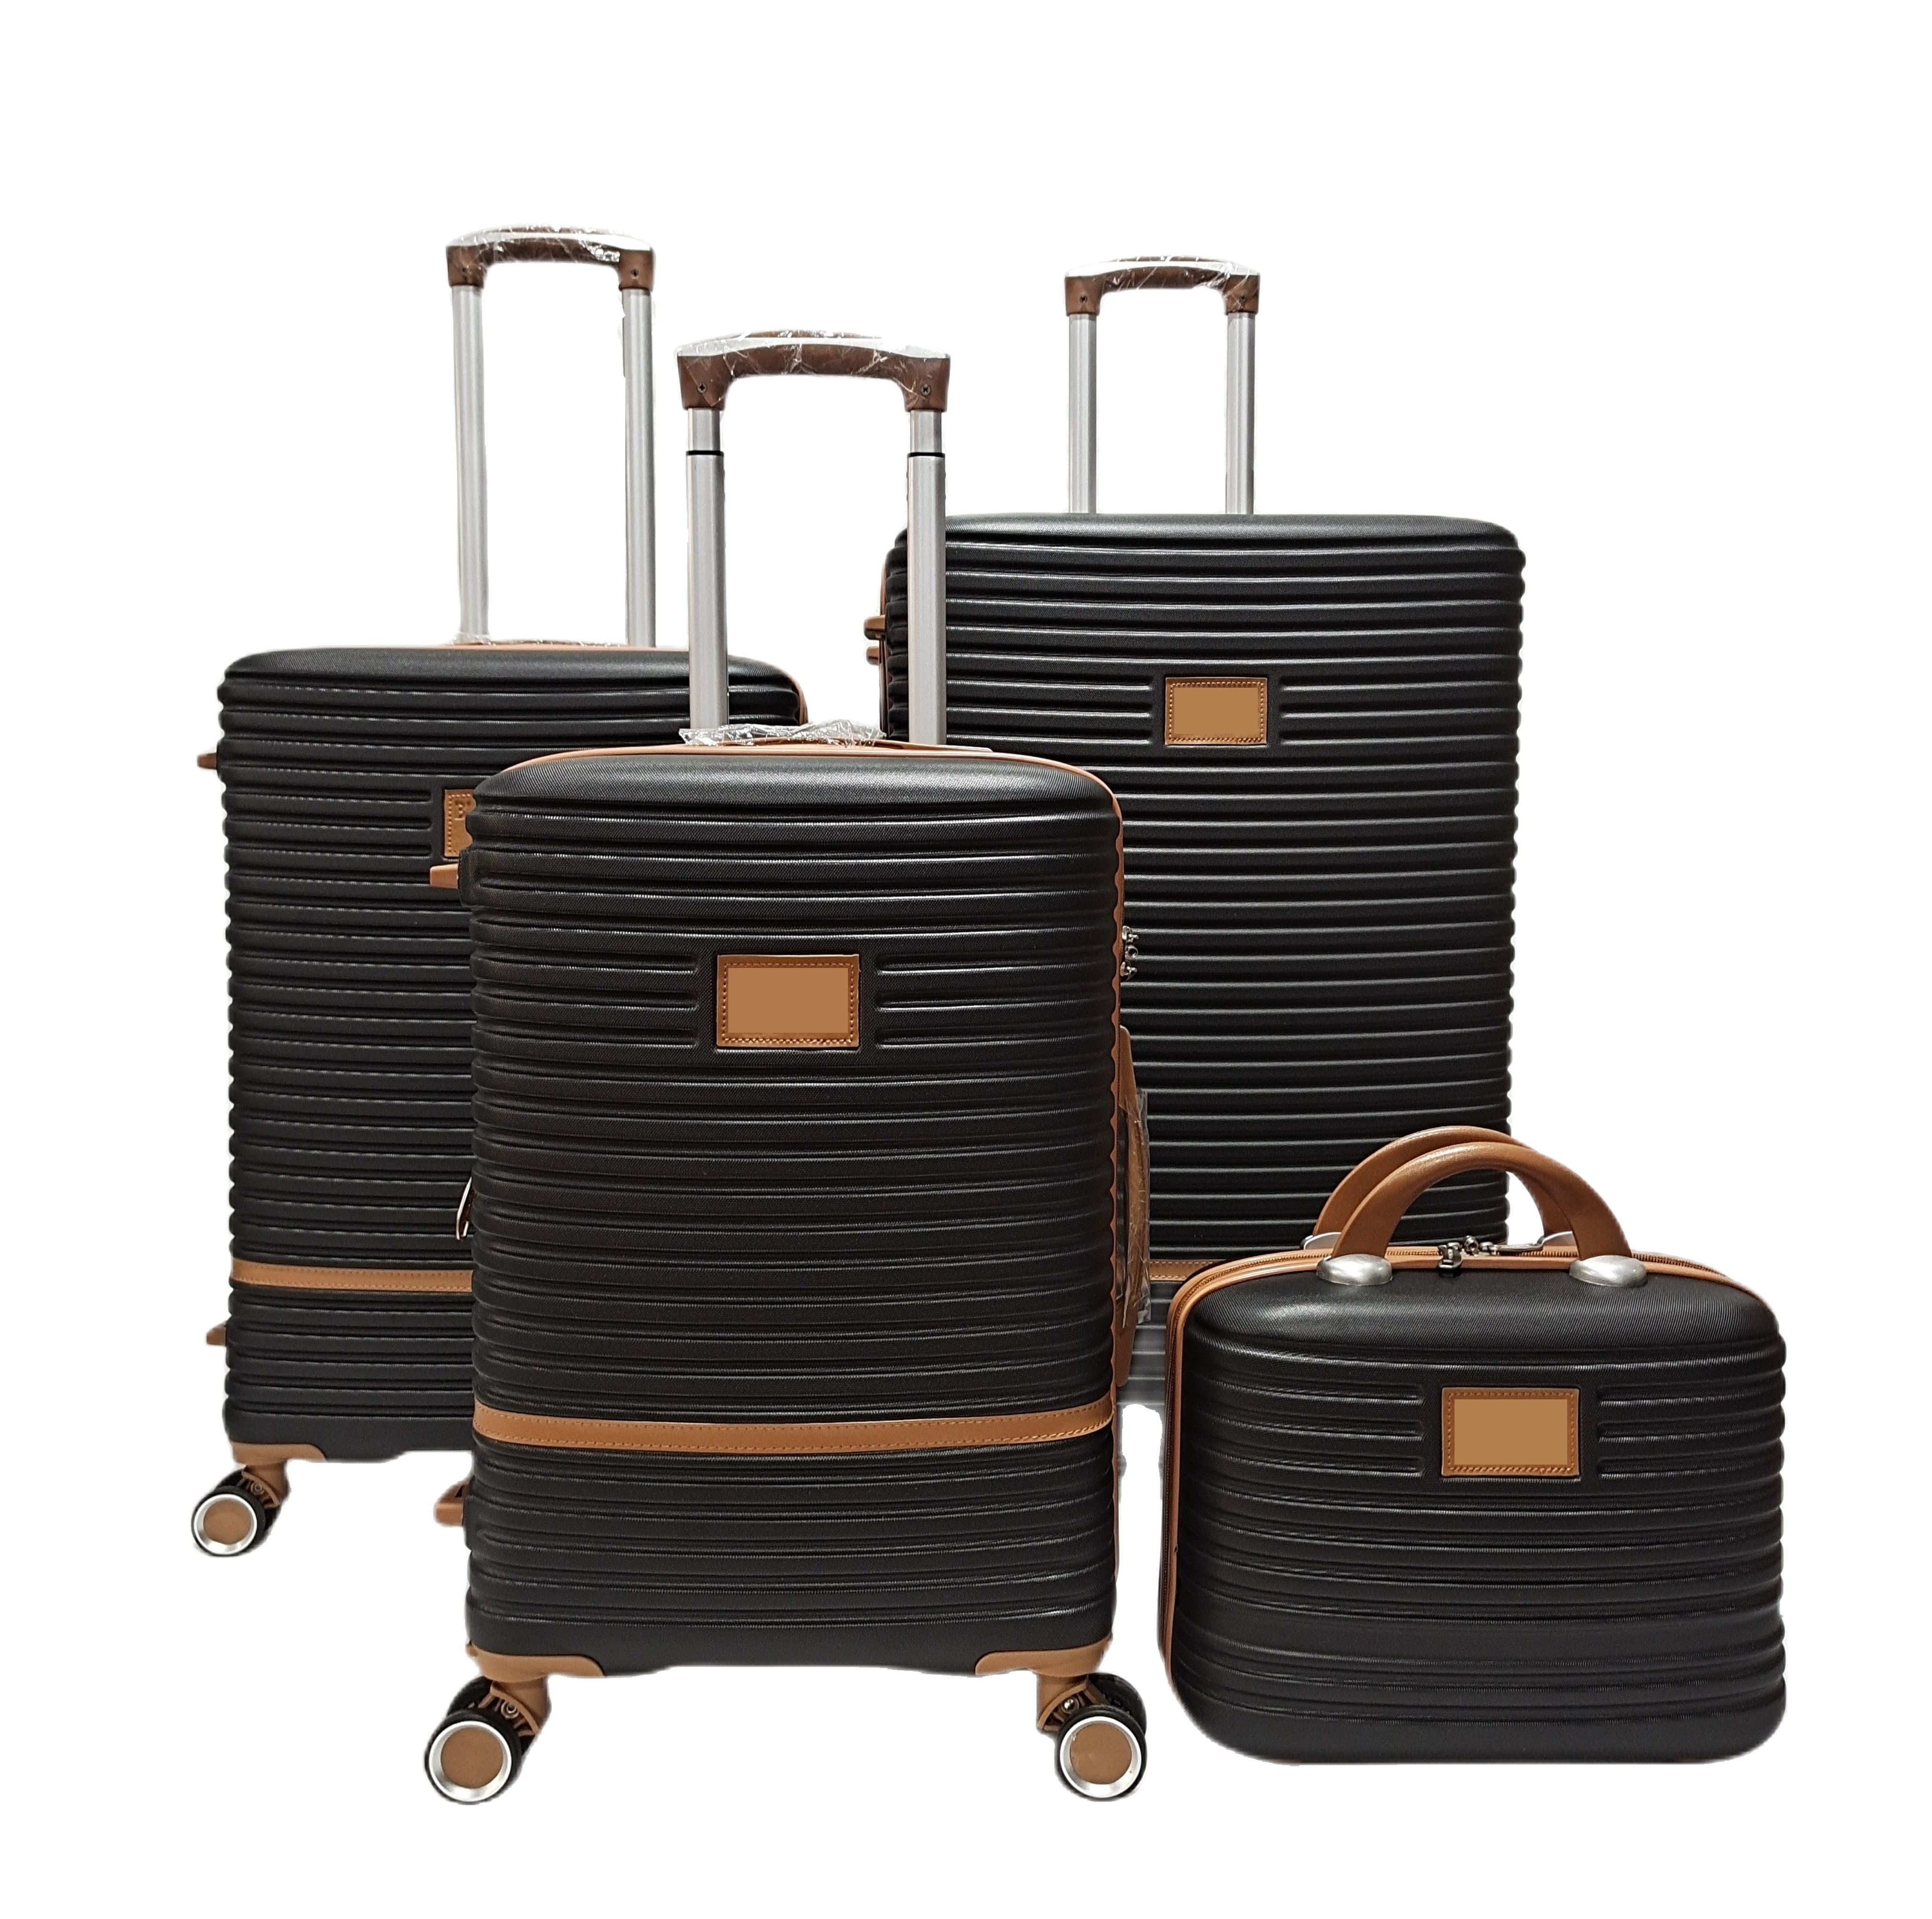 ABS Carry on Luggage Travel Suit Case Set